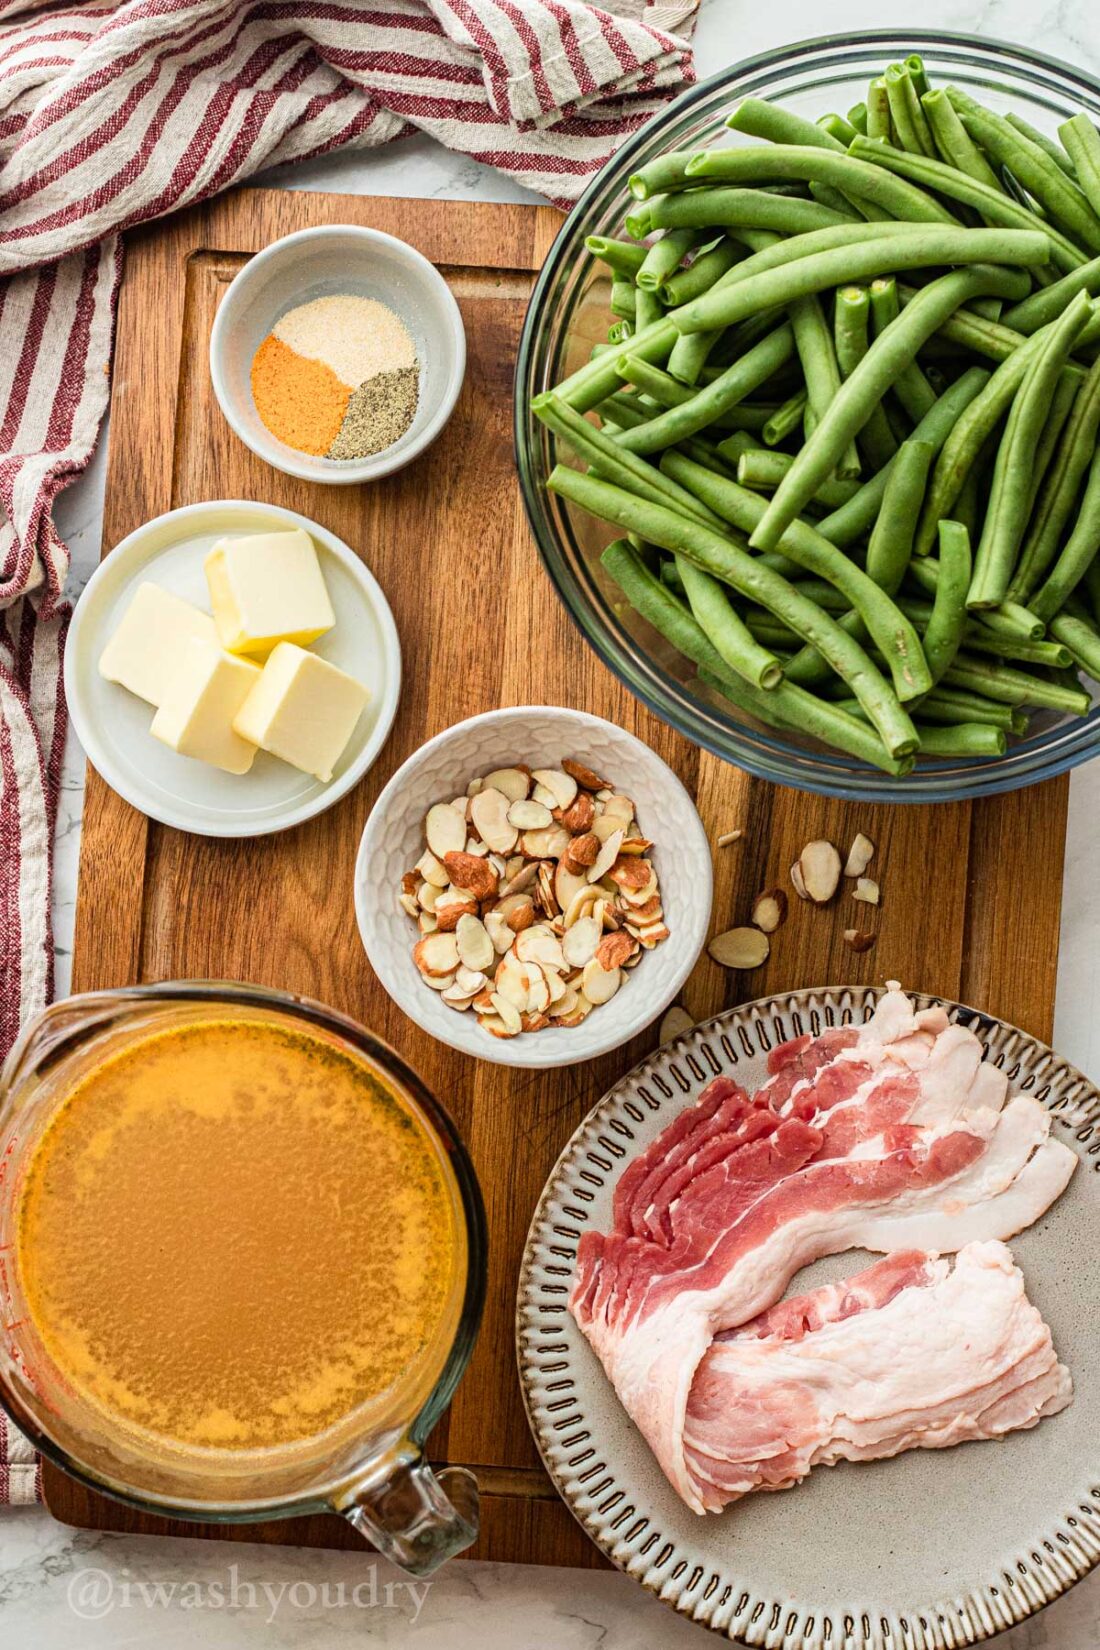 ingredients on wooden surface with bacon and green beans.